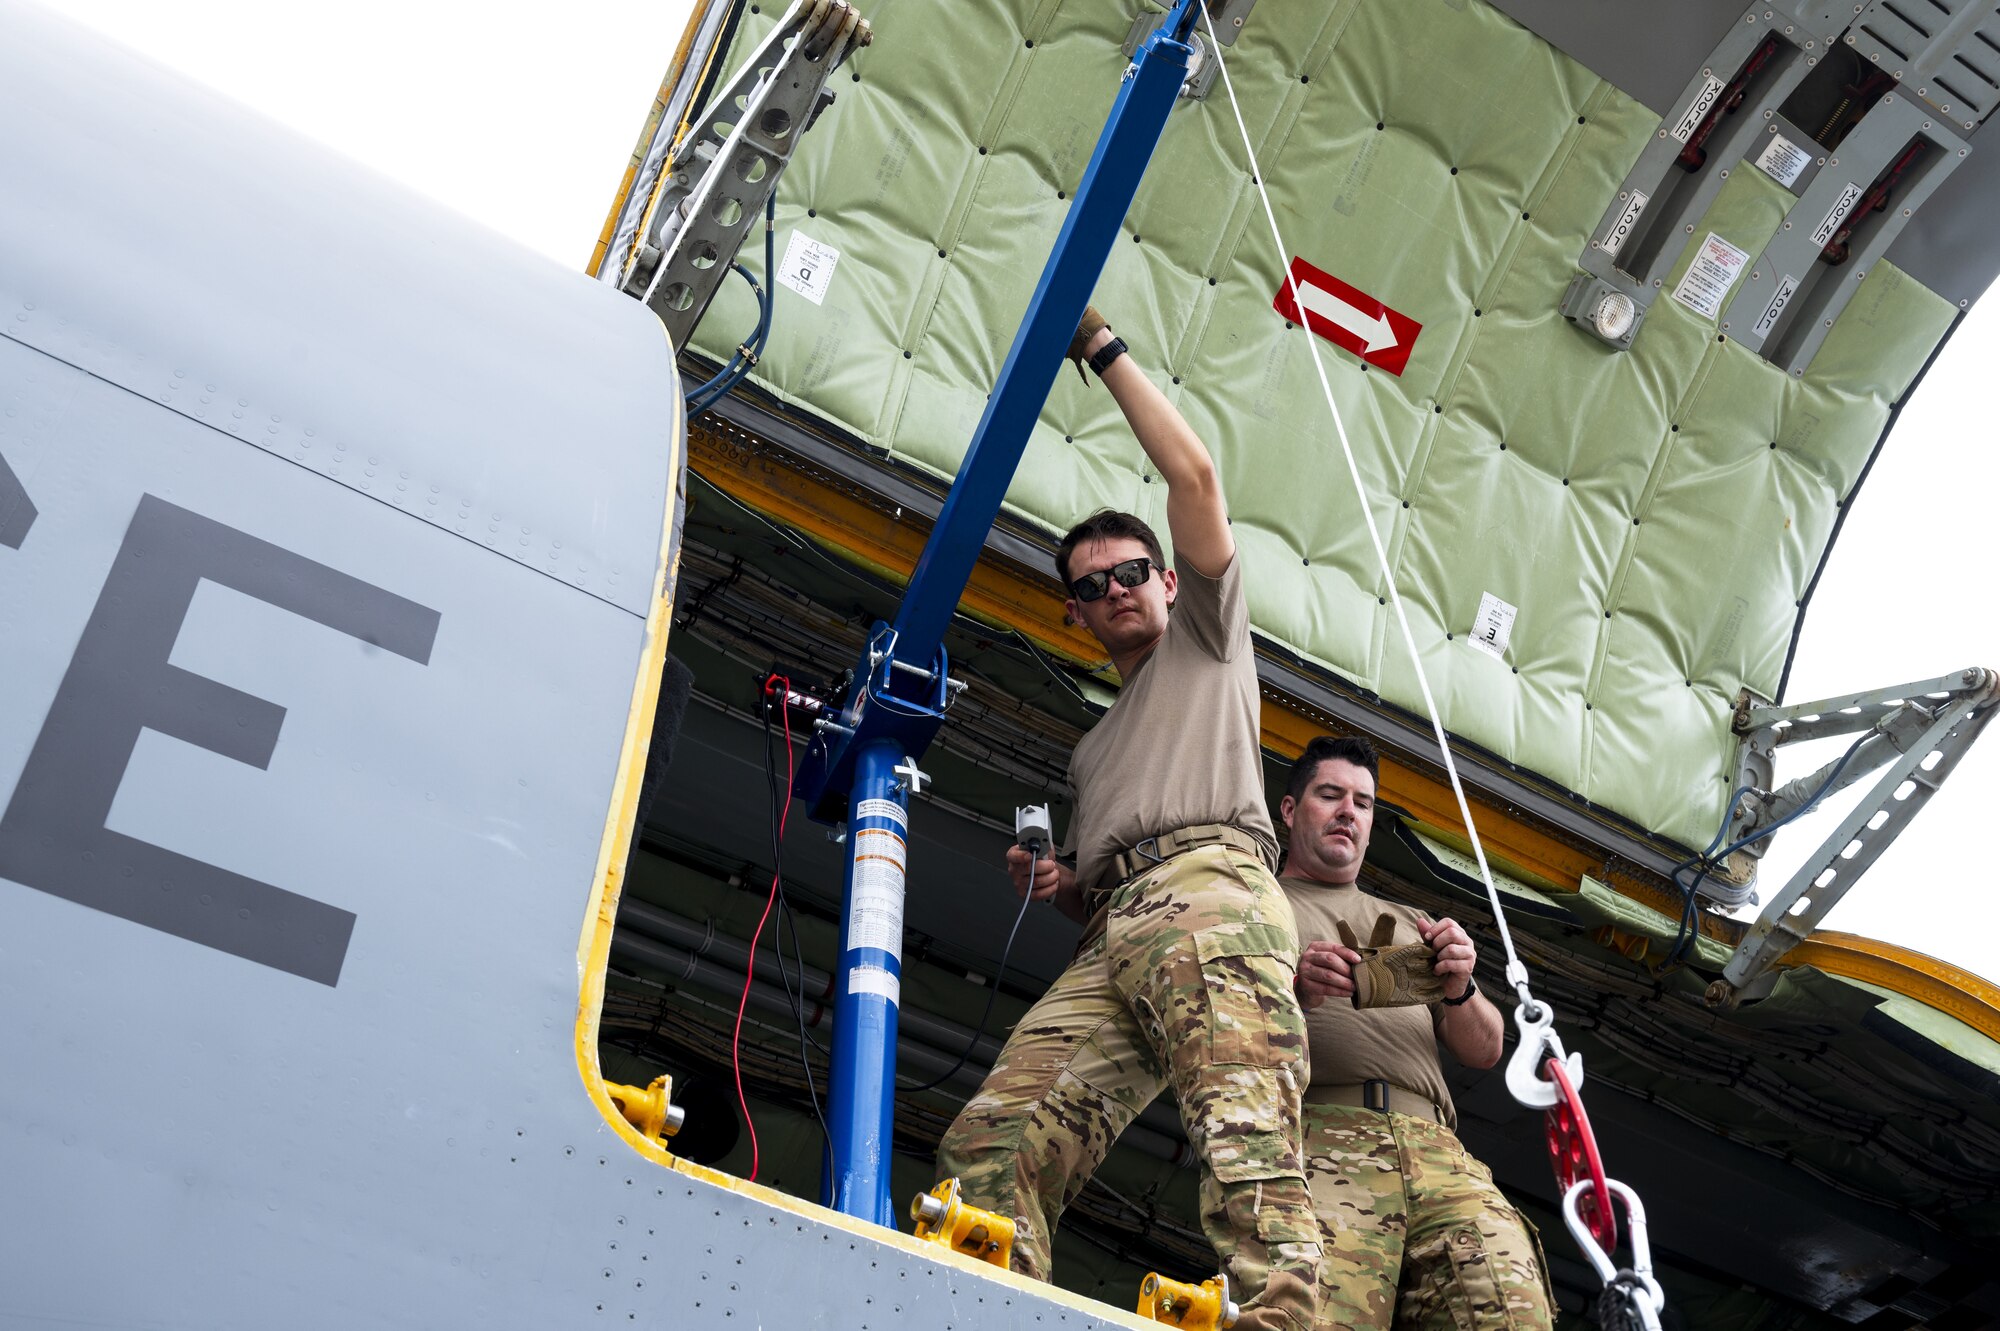 U.S. Air Force Tech. Sgt. Nicholas Sowder, 509th Weapons Squadron Advanced Instructor Training cadre and inflight refueling specialist, operates the Pack and Transport Reloader (PATR) crane prototype at Hurlburt Field, Florida, May 12, 2023. Initial testing for the crane took place at Fairchild AFB in April, and included the crane lifting multiple litters, a 250-pound Versatile Integrating Partner equipment Refueling (VIPER) refueling kit, and 300 pounds of aircraft equipment to include a tow bar. (U.S. Air Force photo by Staff Sgt. Lawrence Sena)